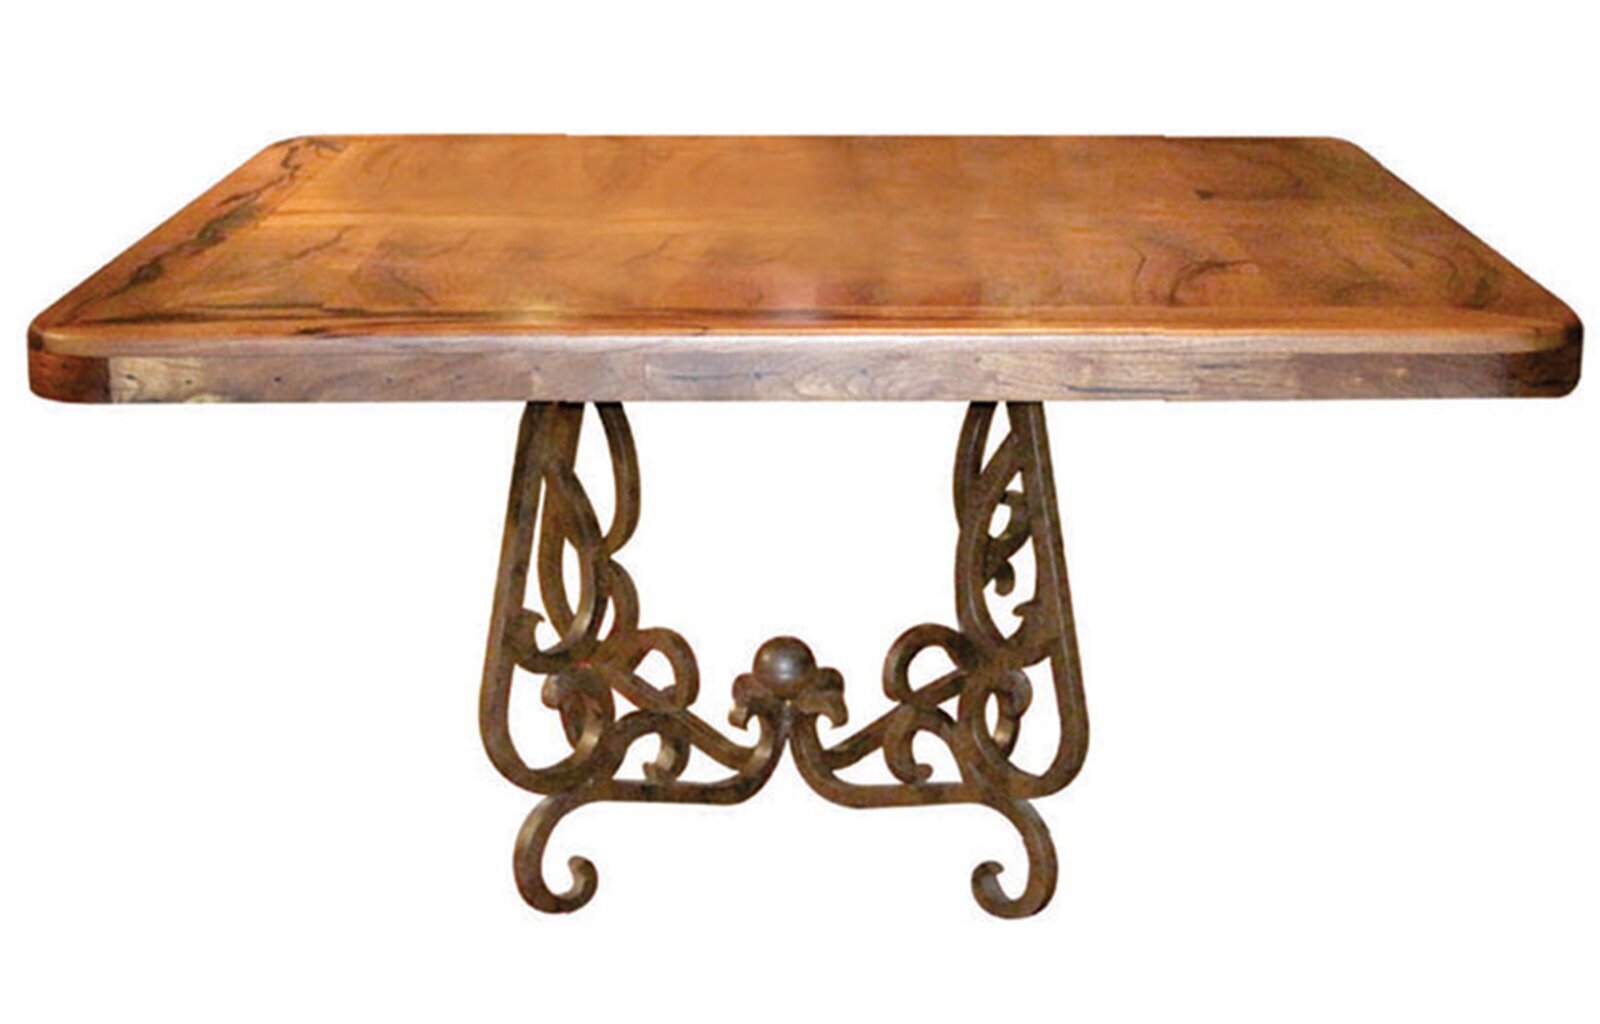 Square Wrought Iron Dining Table with Mesquite Wood Top 